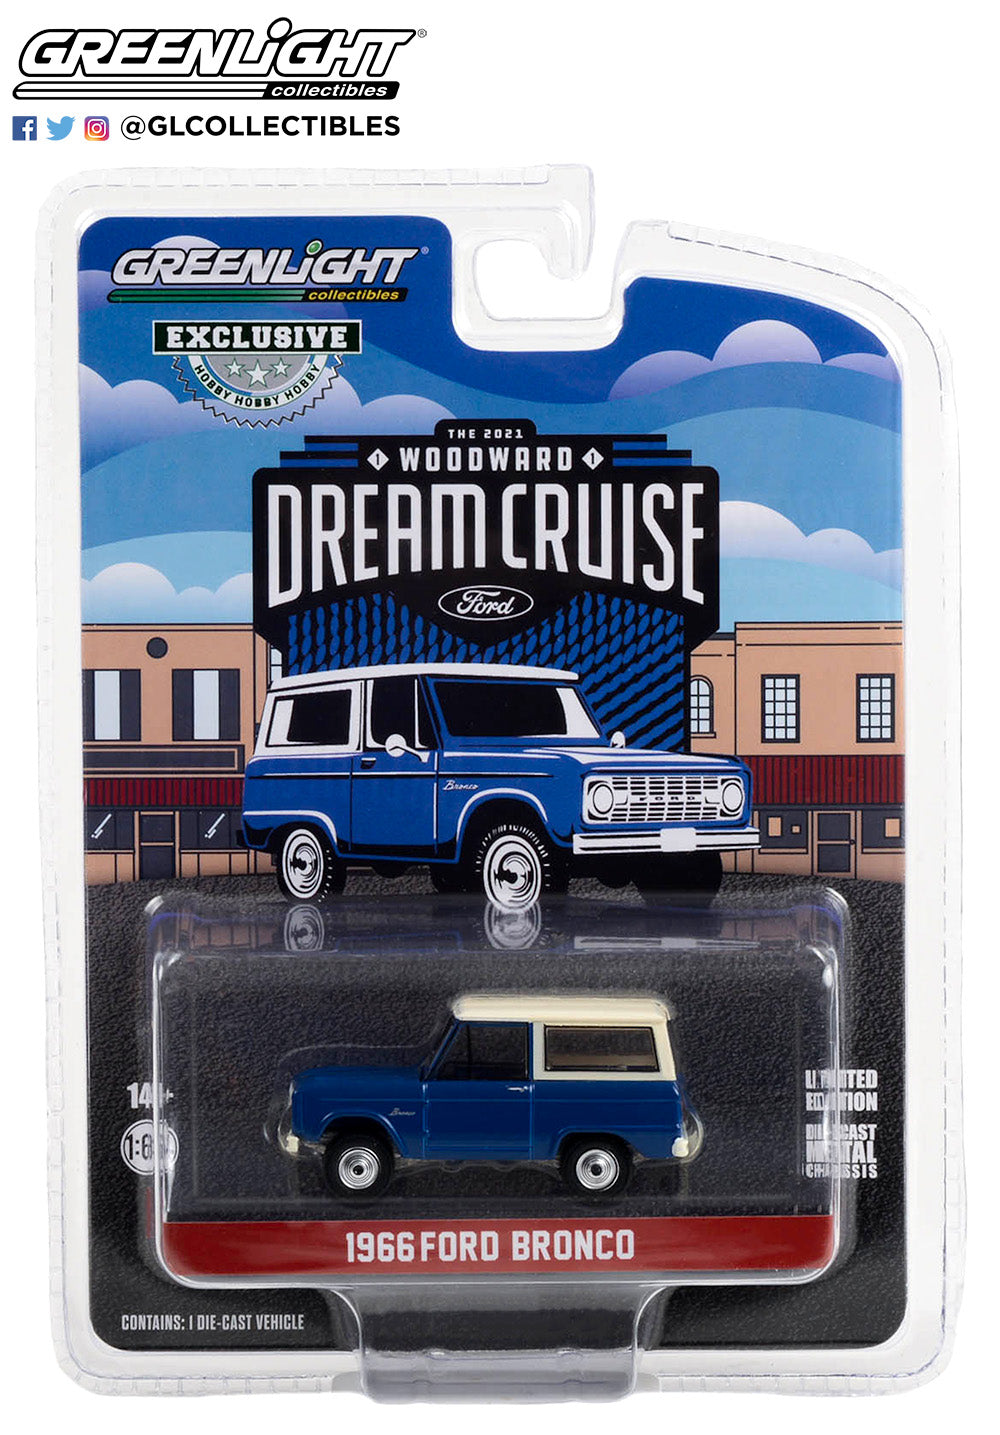 GreenLight 1:64 1966 Ford Bronco - 26th Annual Woodward Dream Cruise Featured Heritage Vehicle 30415